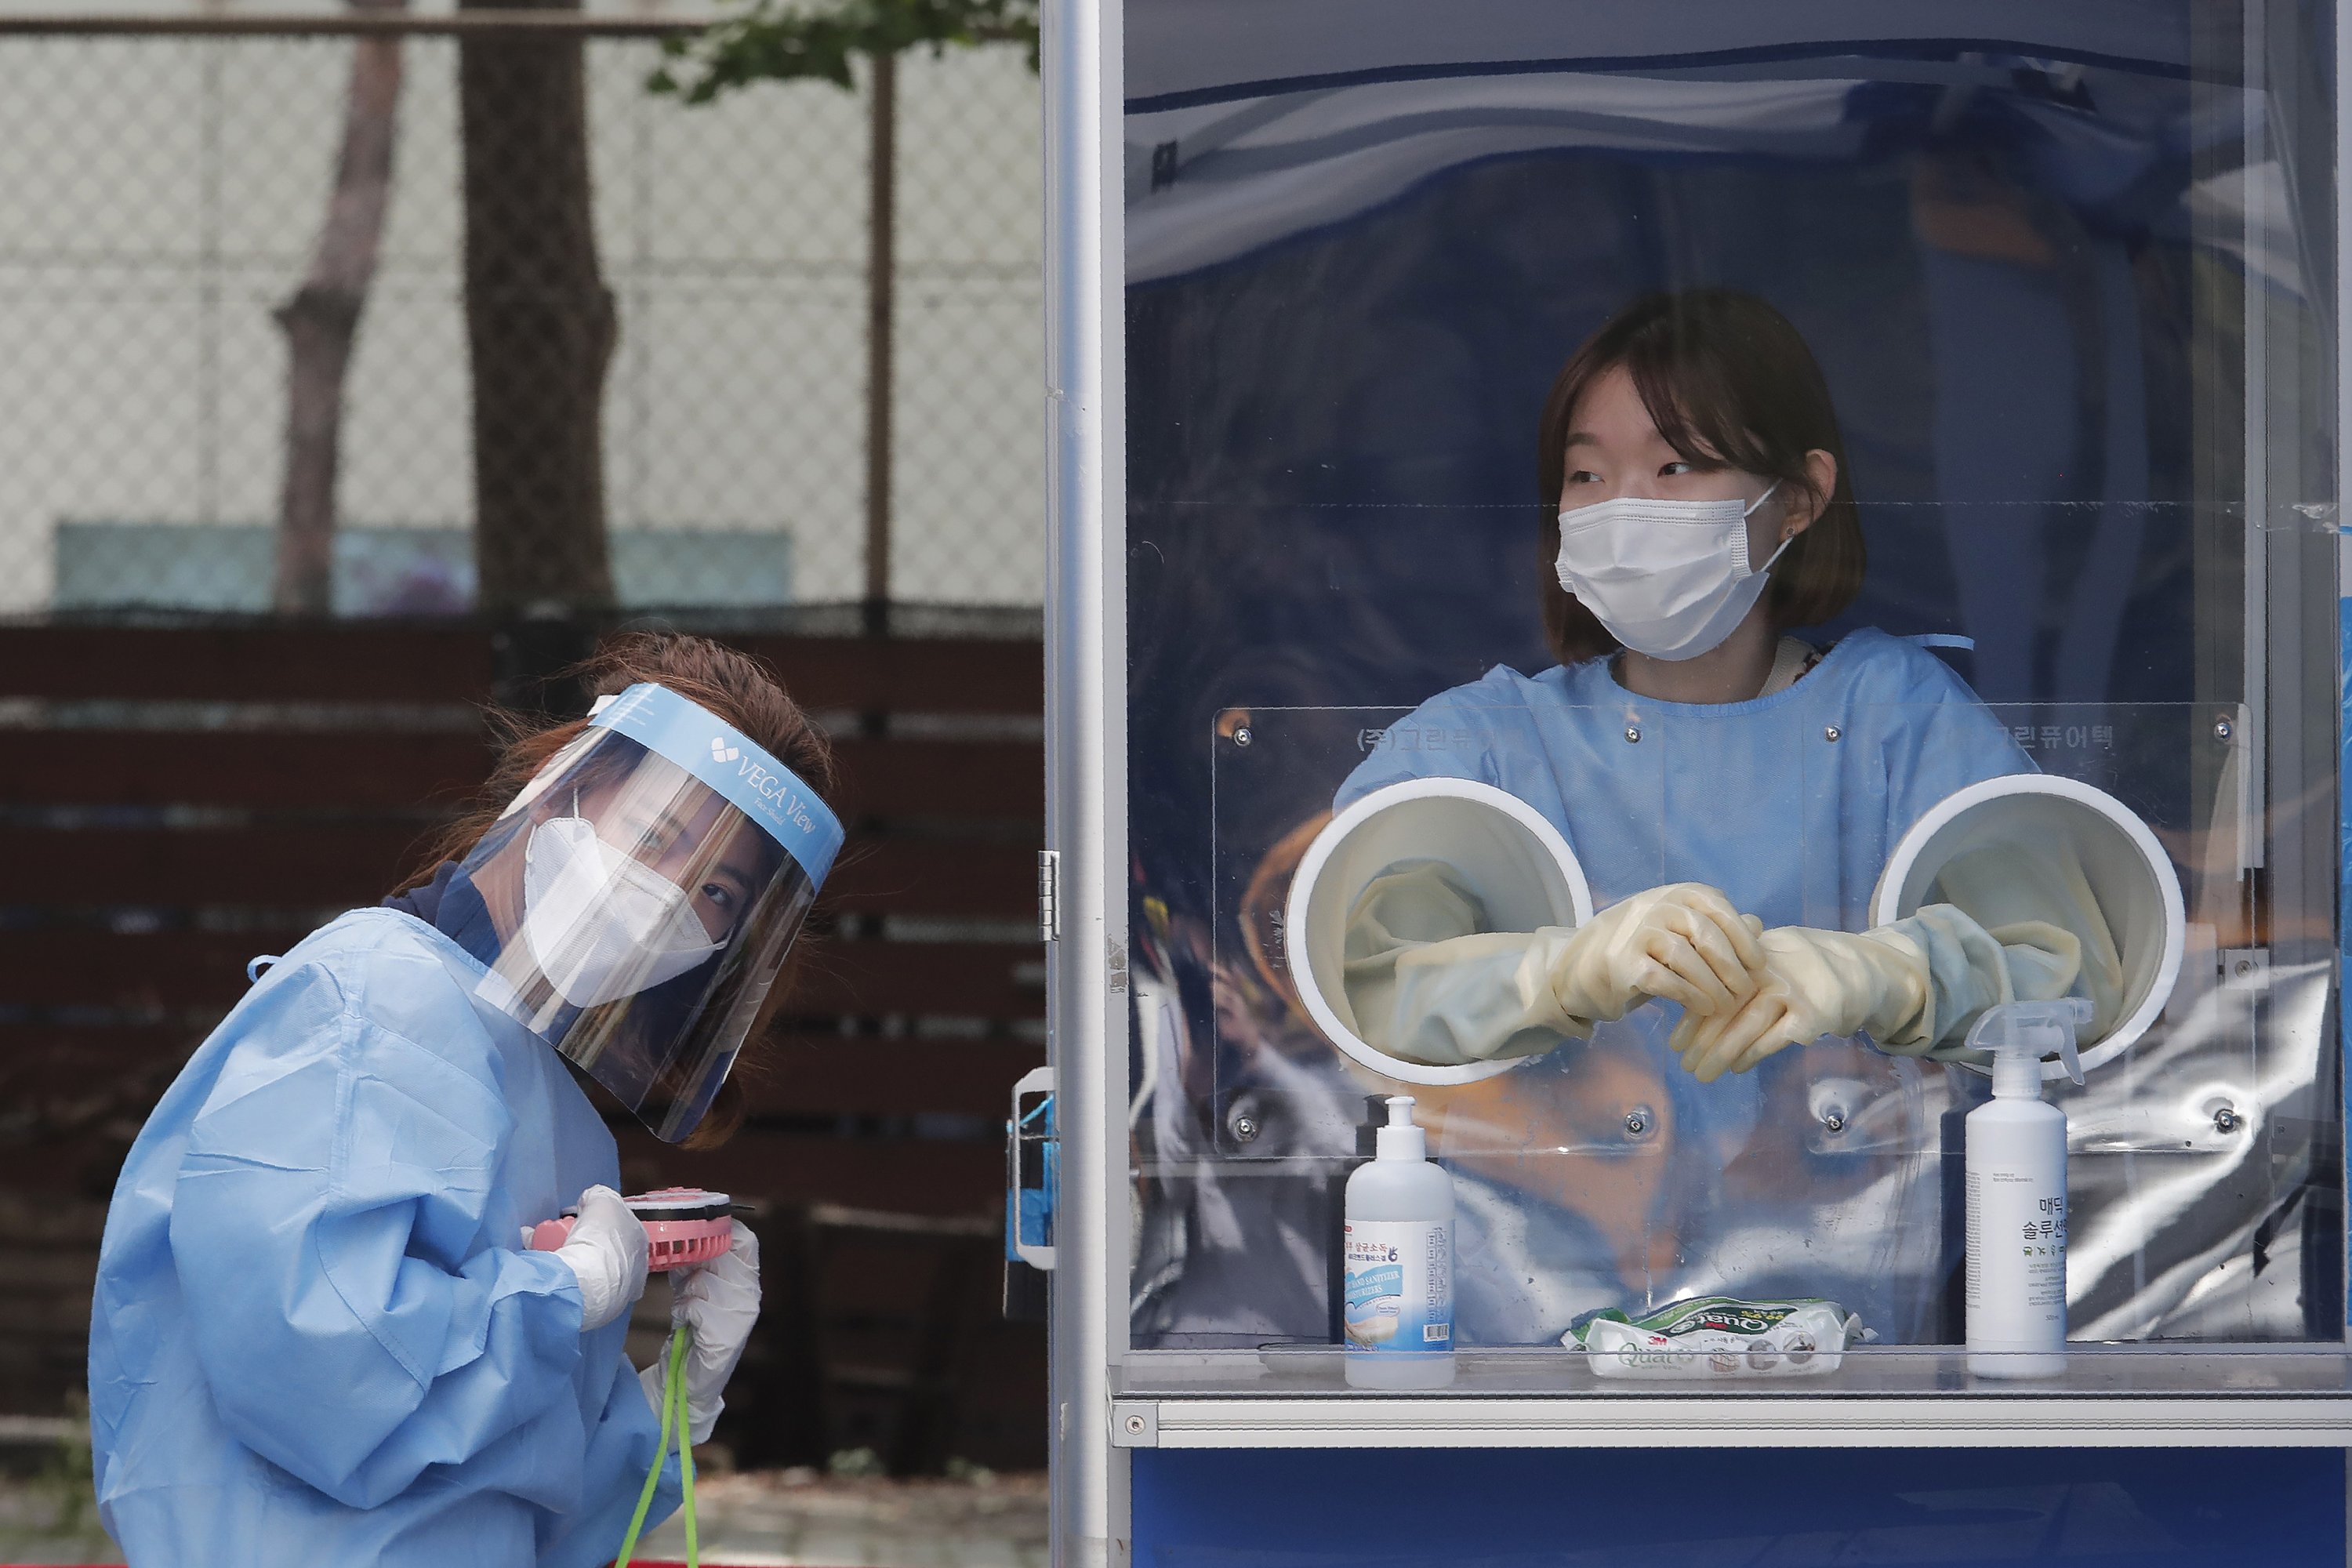 A medical worker holds a portable fan during the sweltering heat while police officers are tested for COVID-19 at a makeshift clinic in Seoul, South Korea, Aug. 19, 2020. (AP Photo)